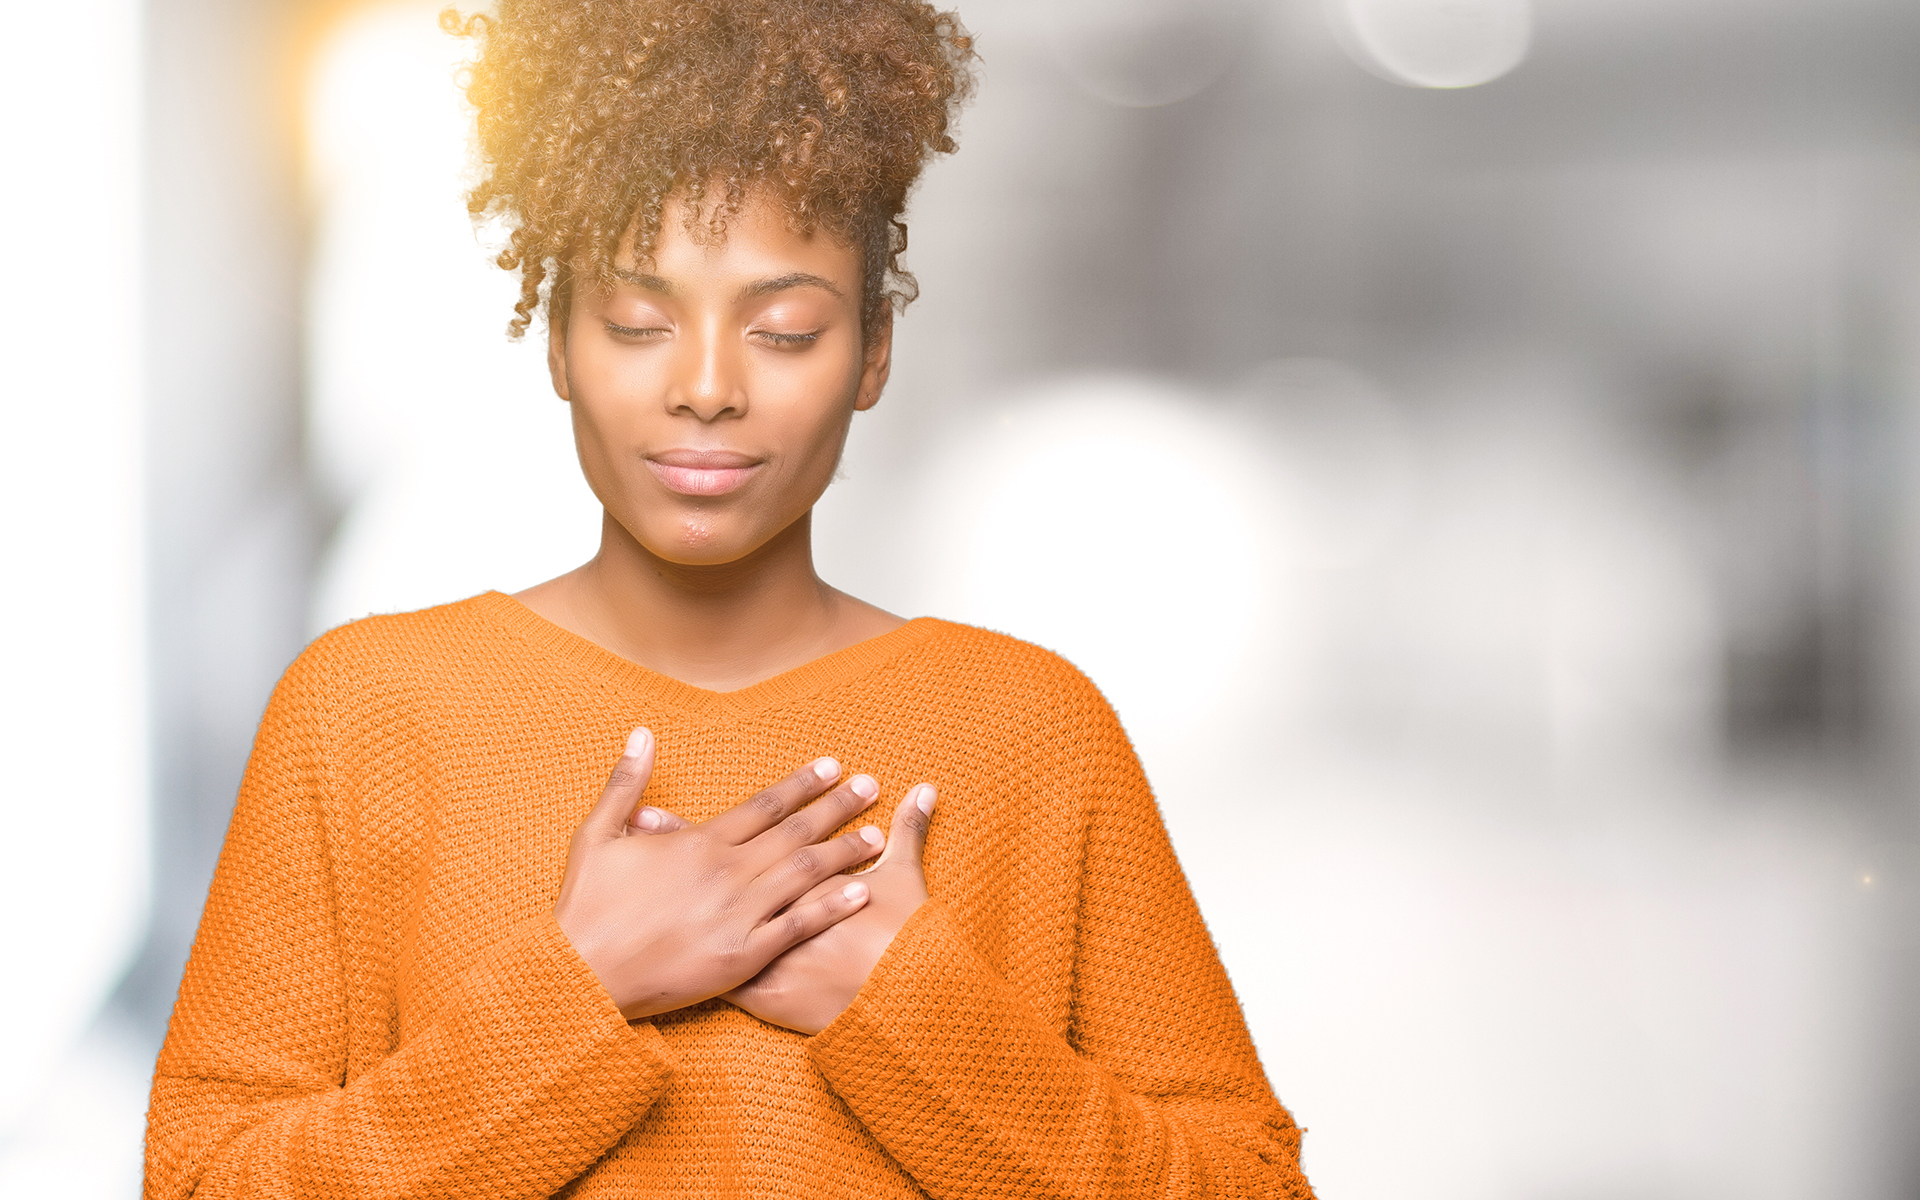 A 5-Minute Body Scan Meditation For Nurturing Your Heart